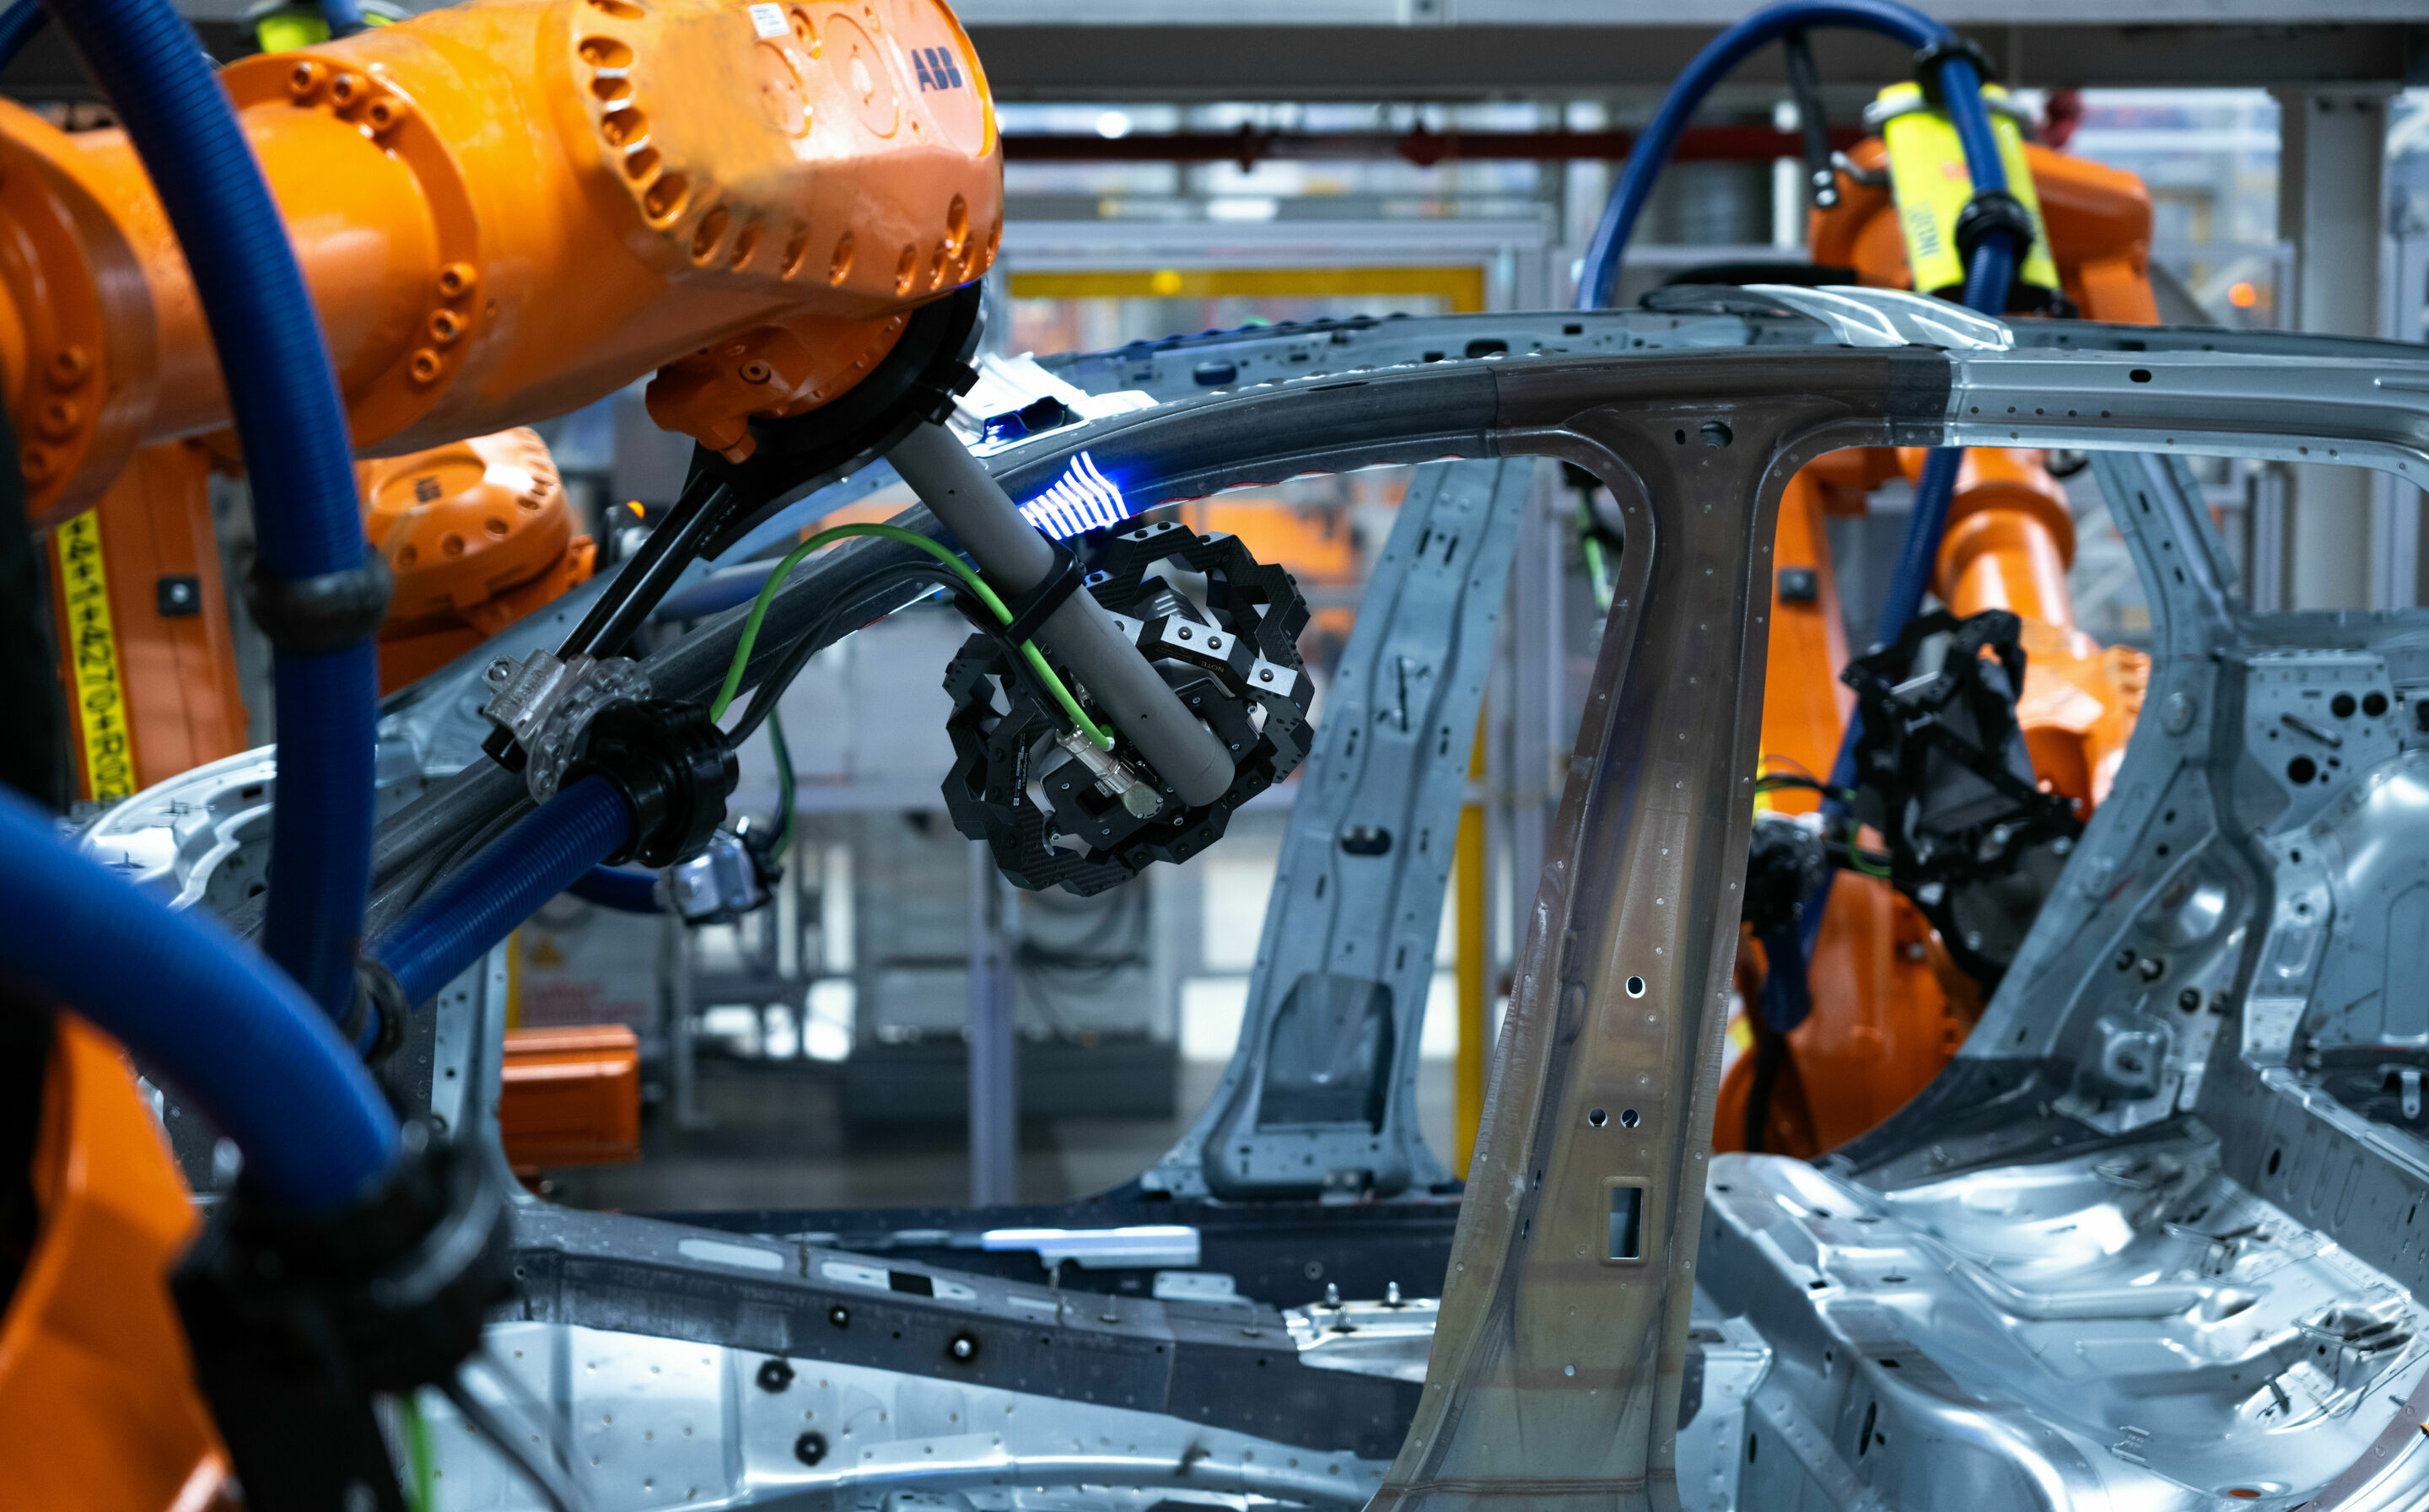 Audi A5 production at the Neckarsulm site